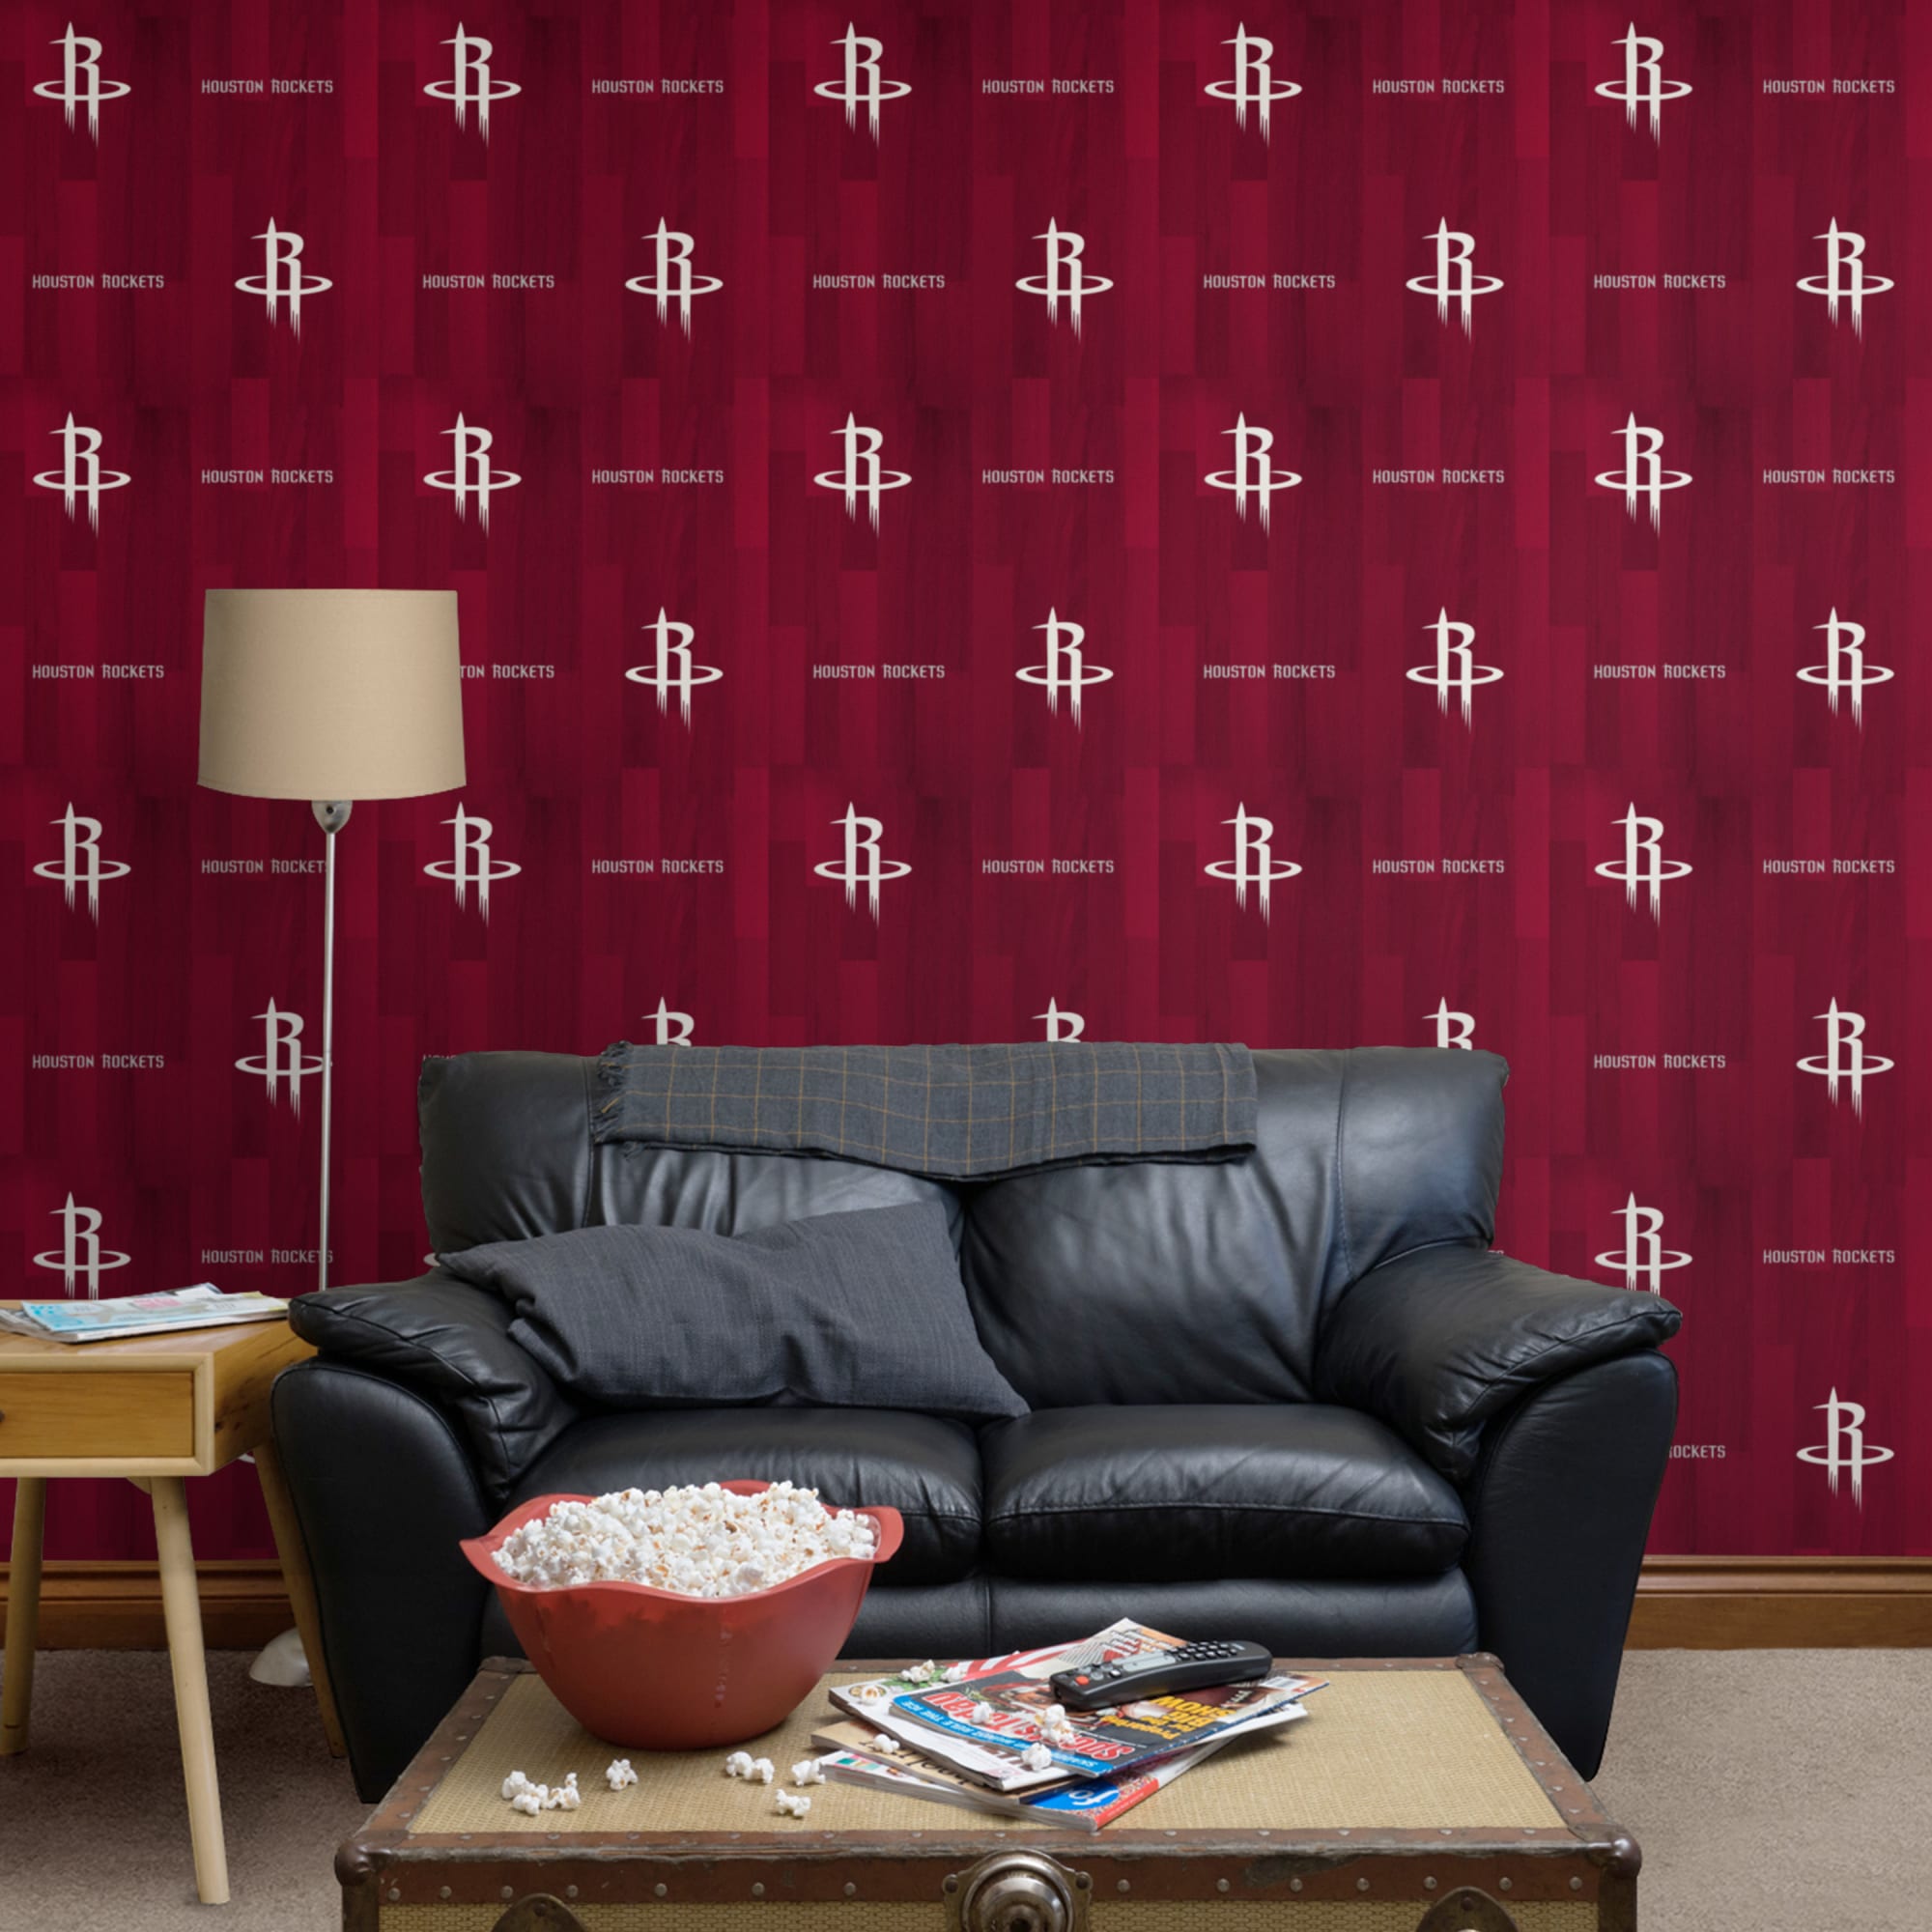 Houston Rockets: Hardwood Pattern - Officially Licensed Removable Wallpaper 12" x 12" Sample by Fathead